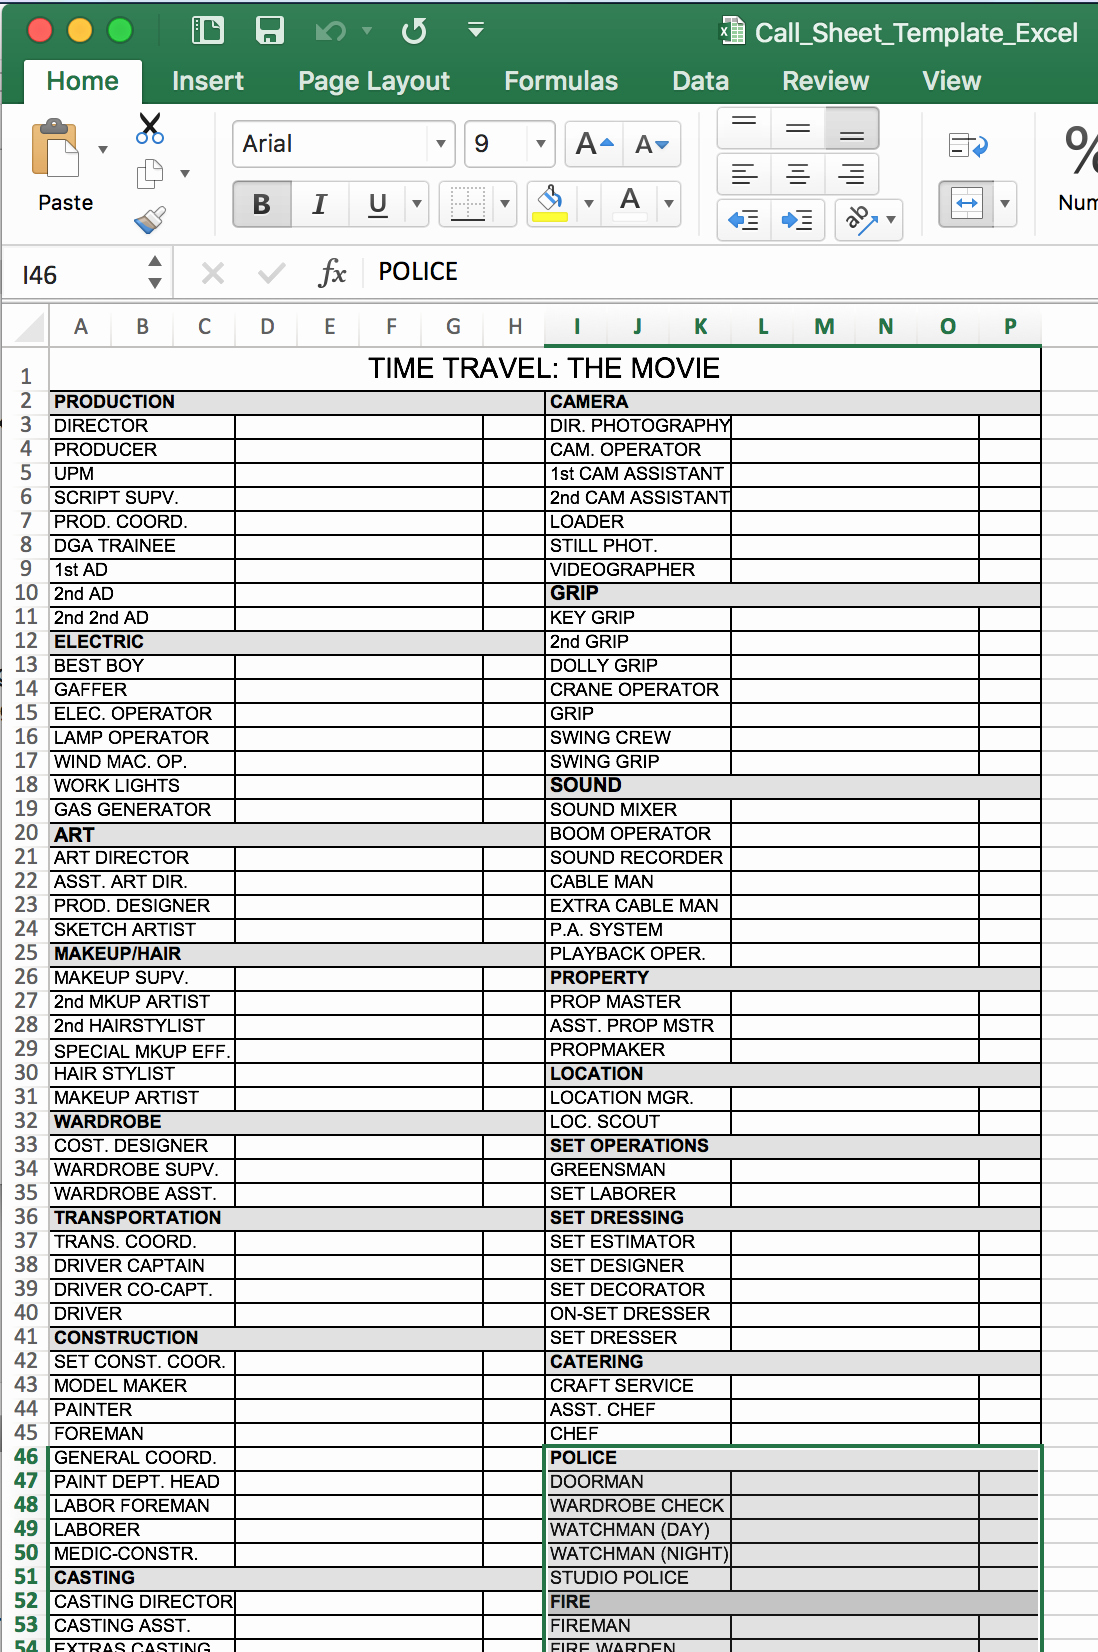 Call Sheet Template Excel Lovely Free Call Sheet Template In Excel